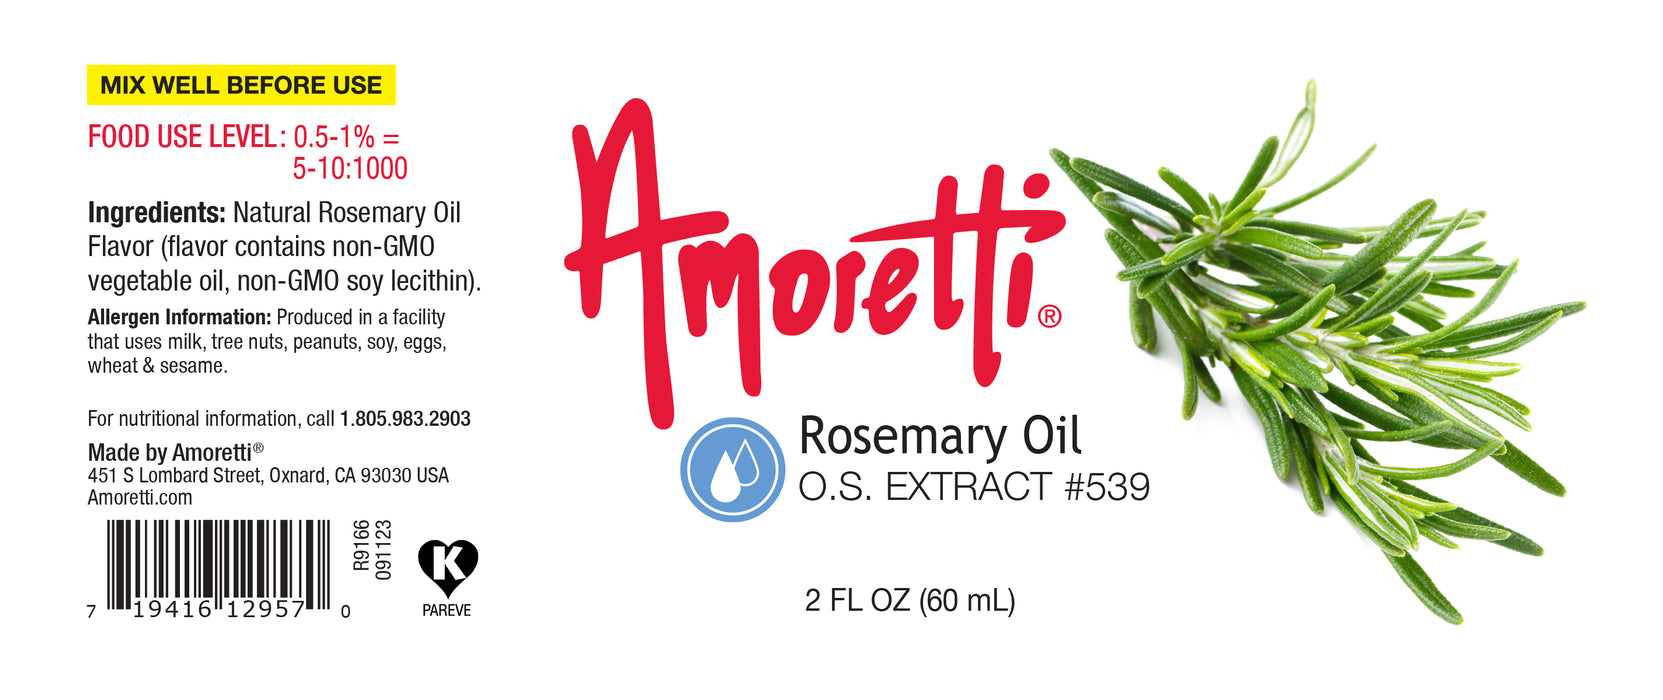 Rosemary Oil Extract Oil Soluble